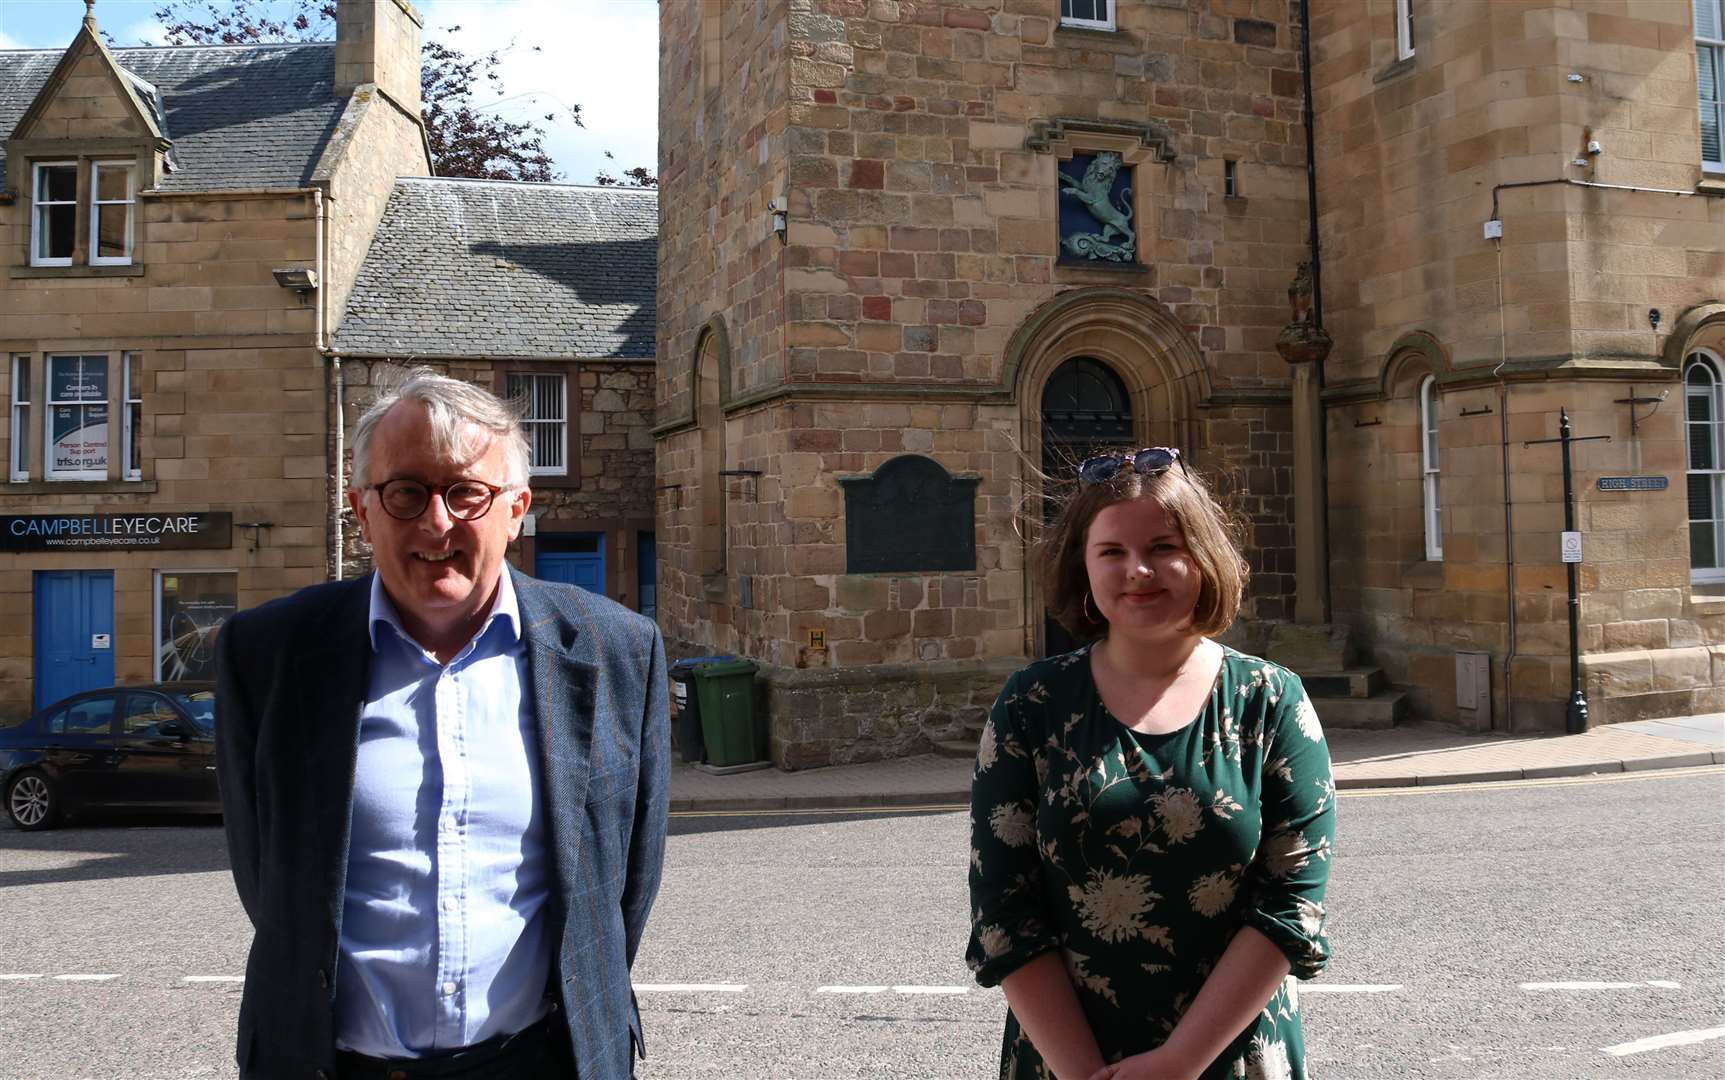 Jamie Stone MP with Molly Nolan, the Liberal Democrats' candidate for Caithness, Sutherland and Ross at the next Holyrood elections.